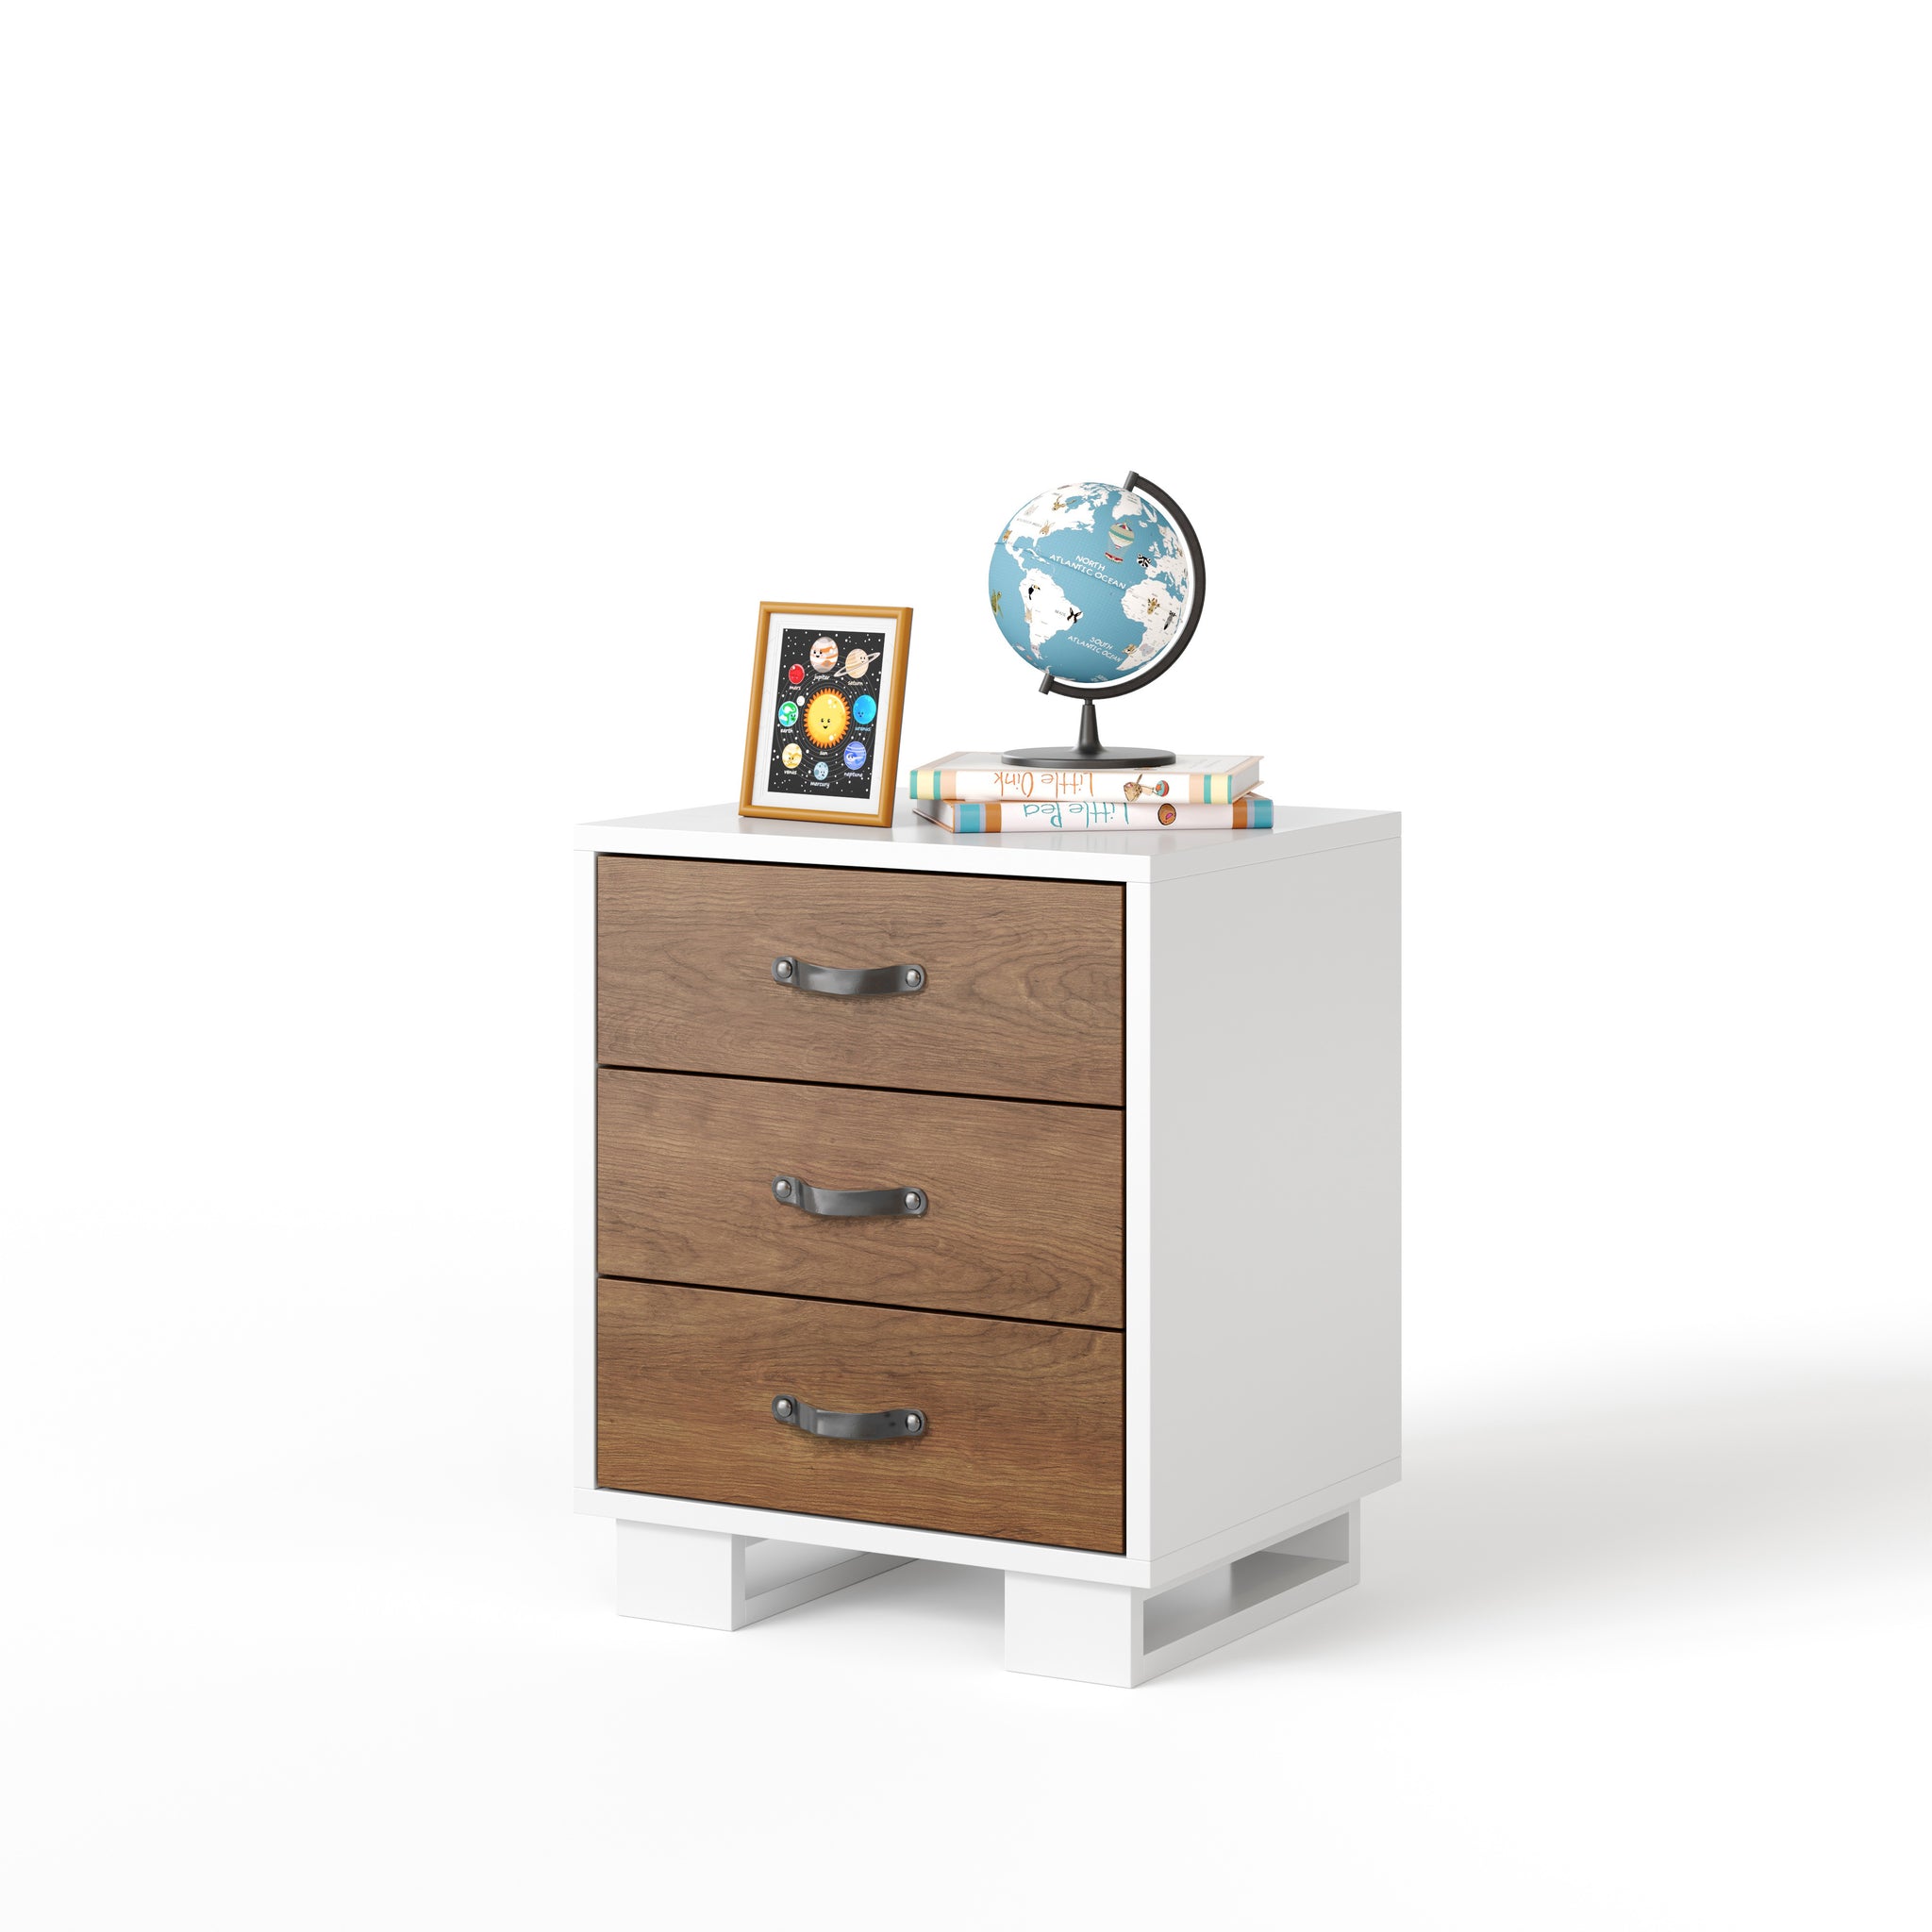 austin nightstand - leather pull - white maple